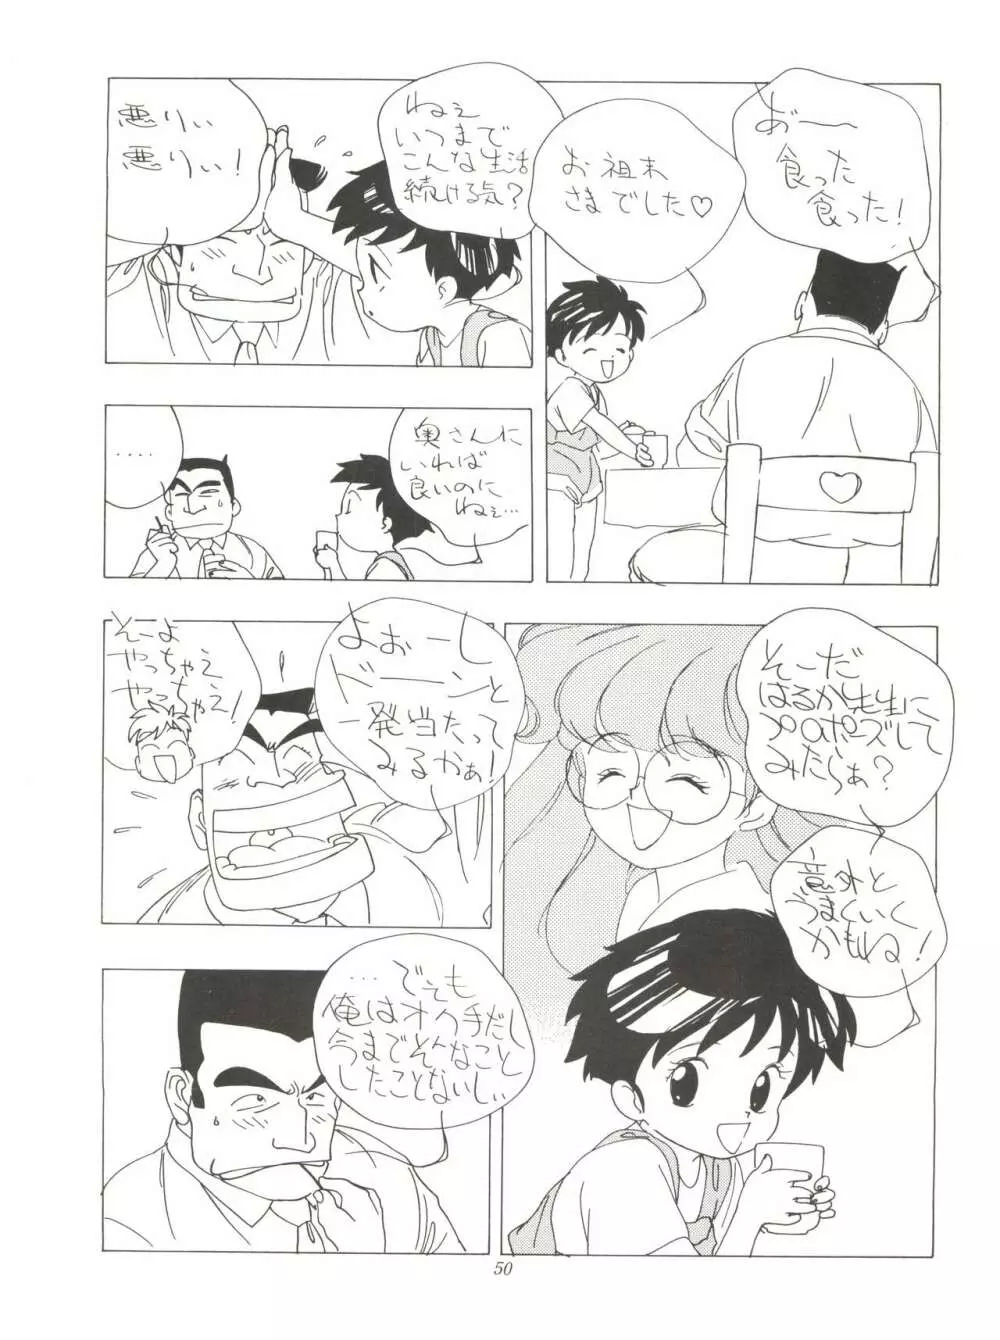 FLY! ISAMI!! - page54